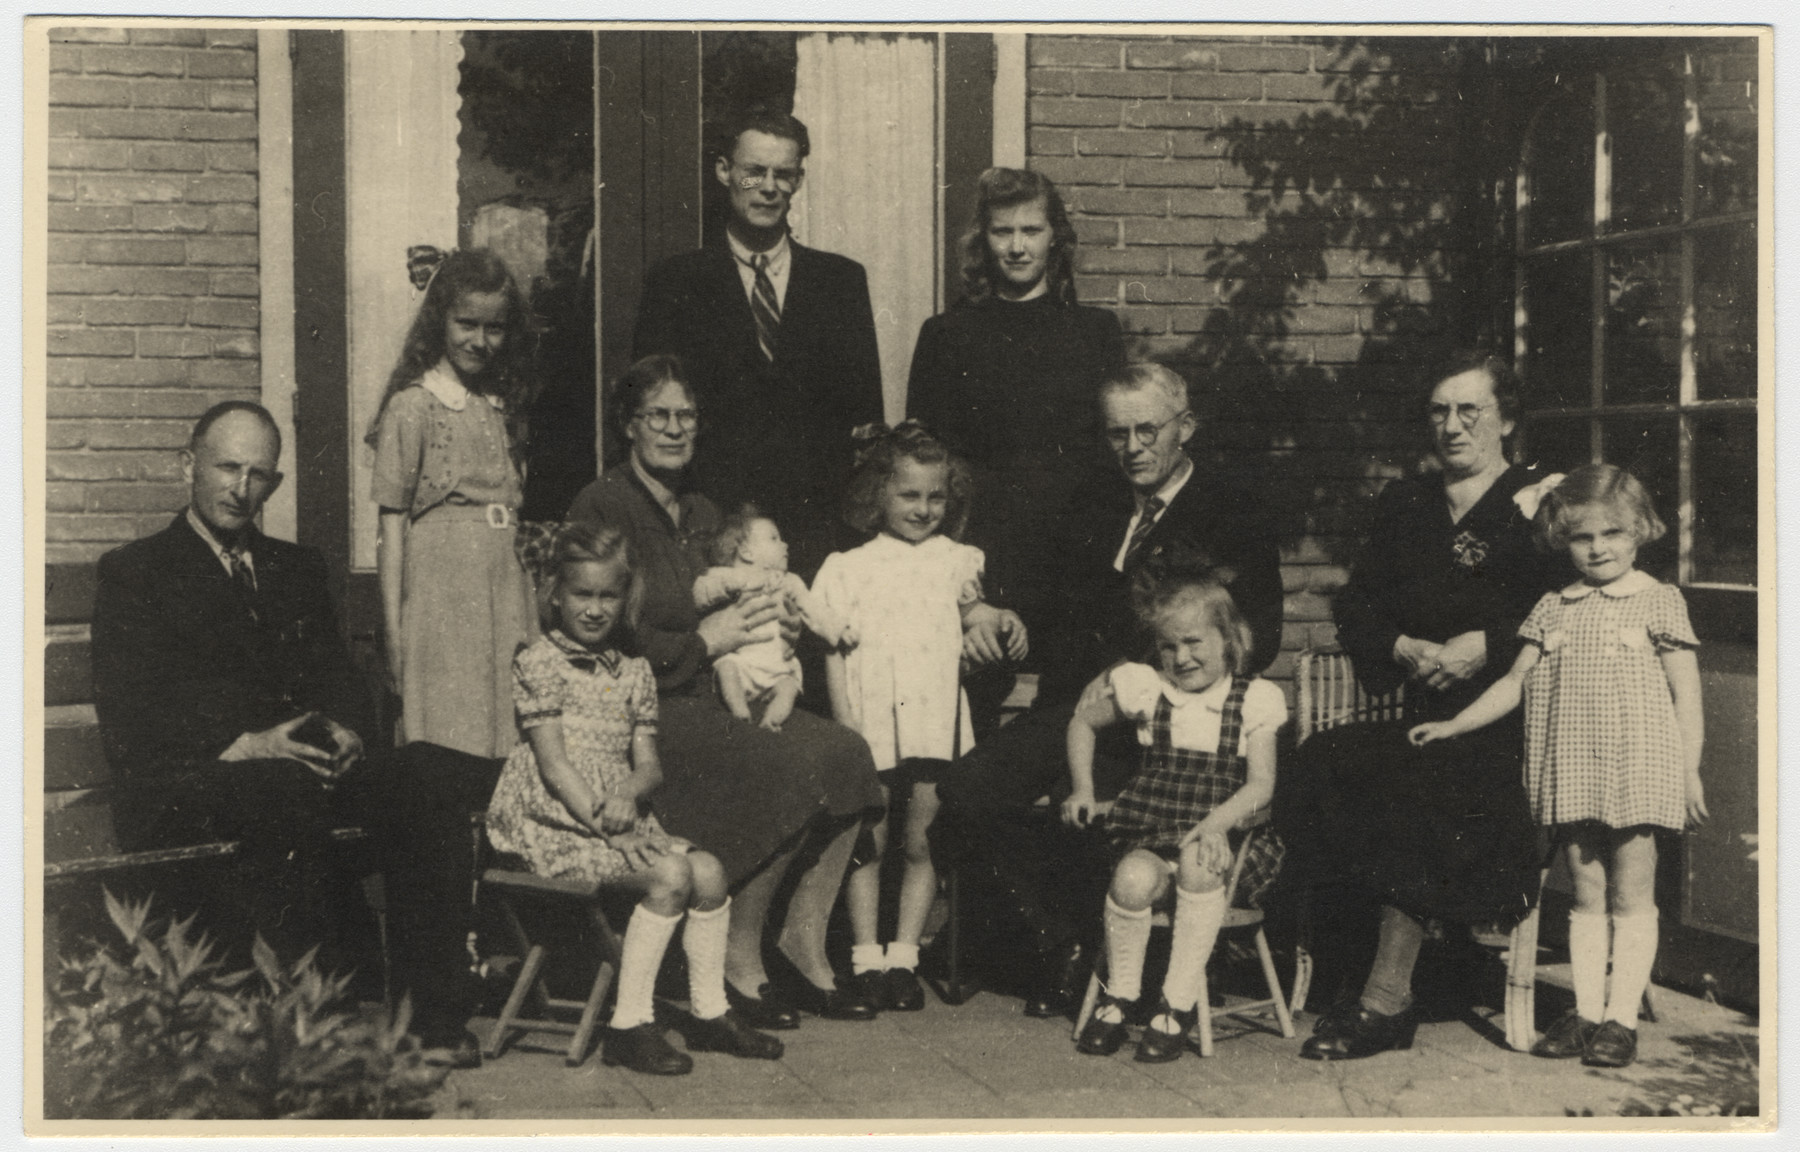 Group photograph of two Dutch rescuers families and the two Jewish sisters they saved.

Pictured on the left are Dirk and Cornelia van der Kamp and their three daughters.  Marjetta Kleerhoper is next to them in a white dress.  Anton and Wilhelmina Heger are seated on the right with Elisabeth Kleerhoper.  The Heger children are in the back.